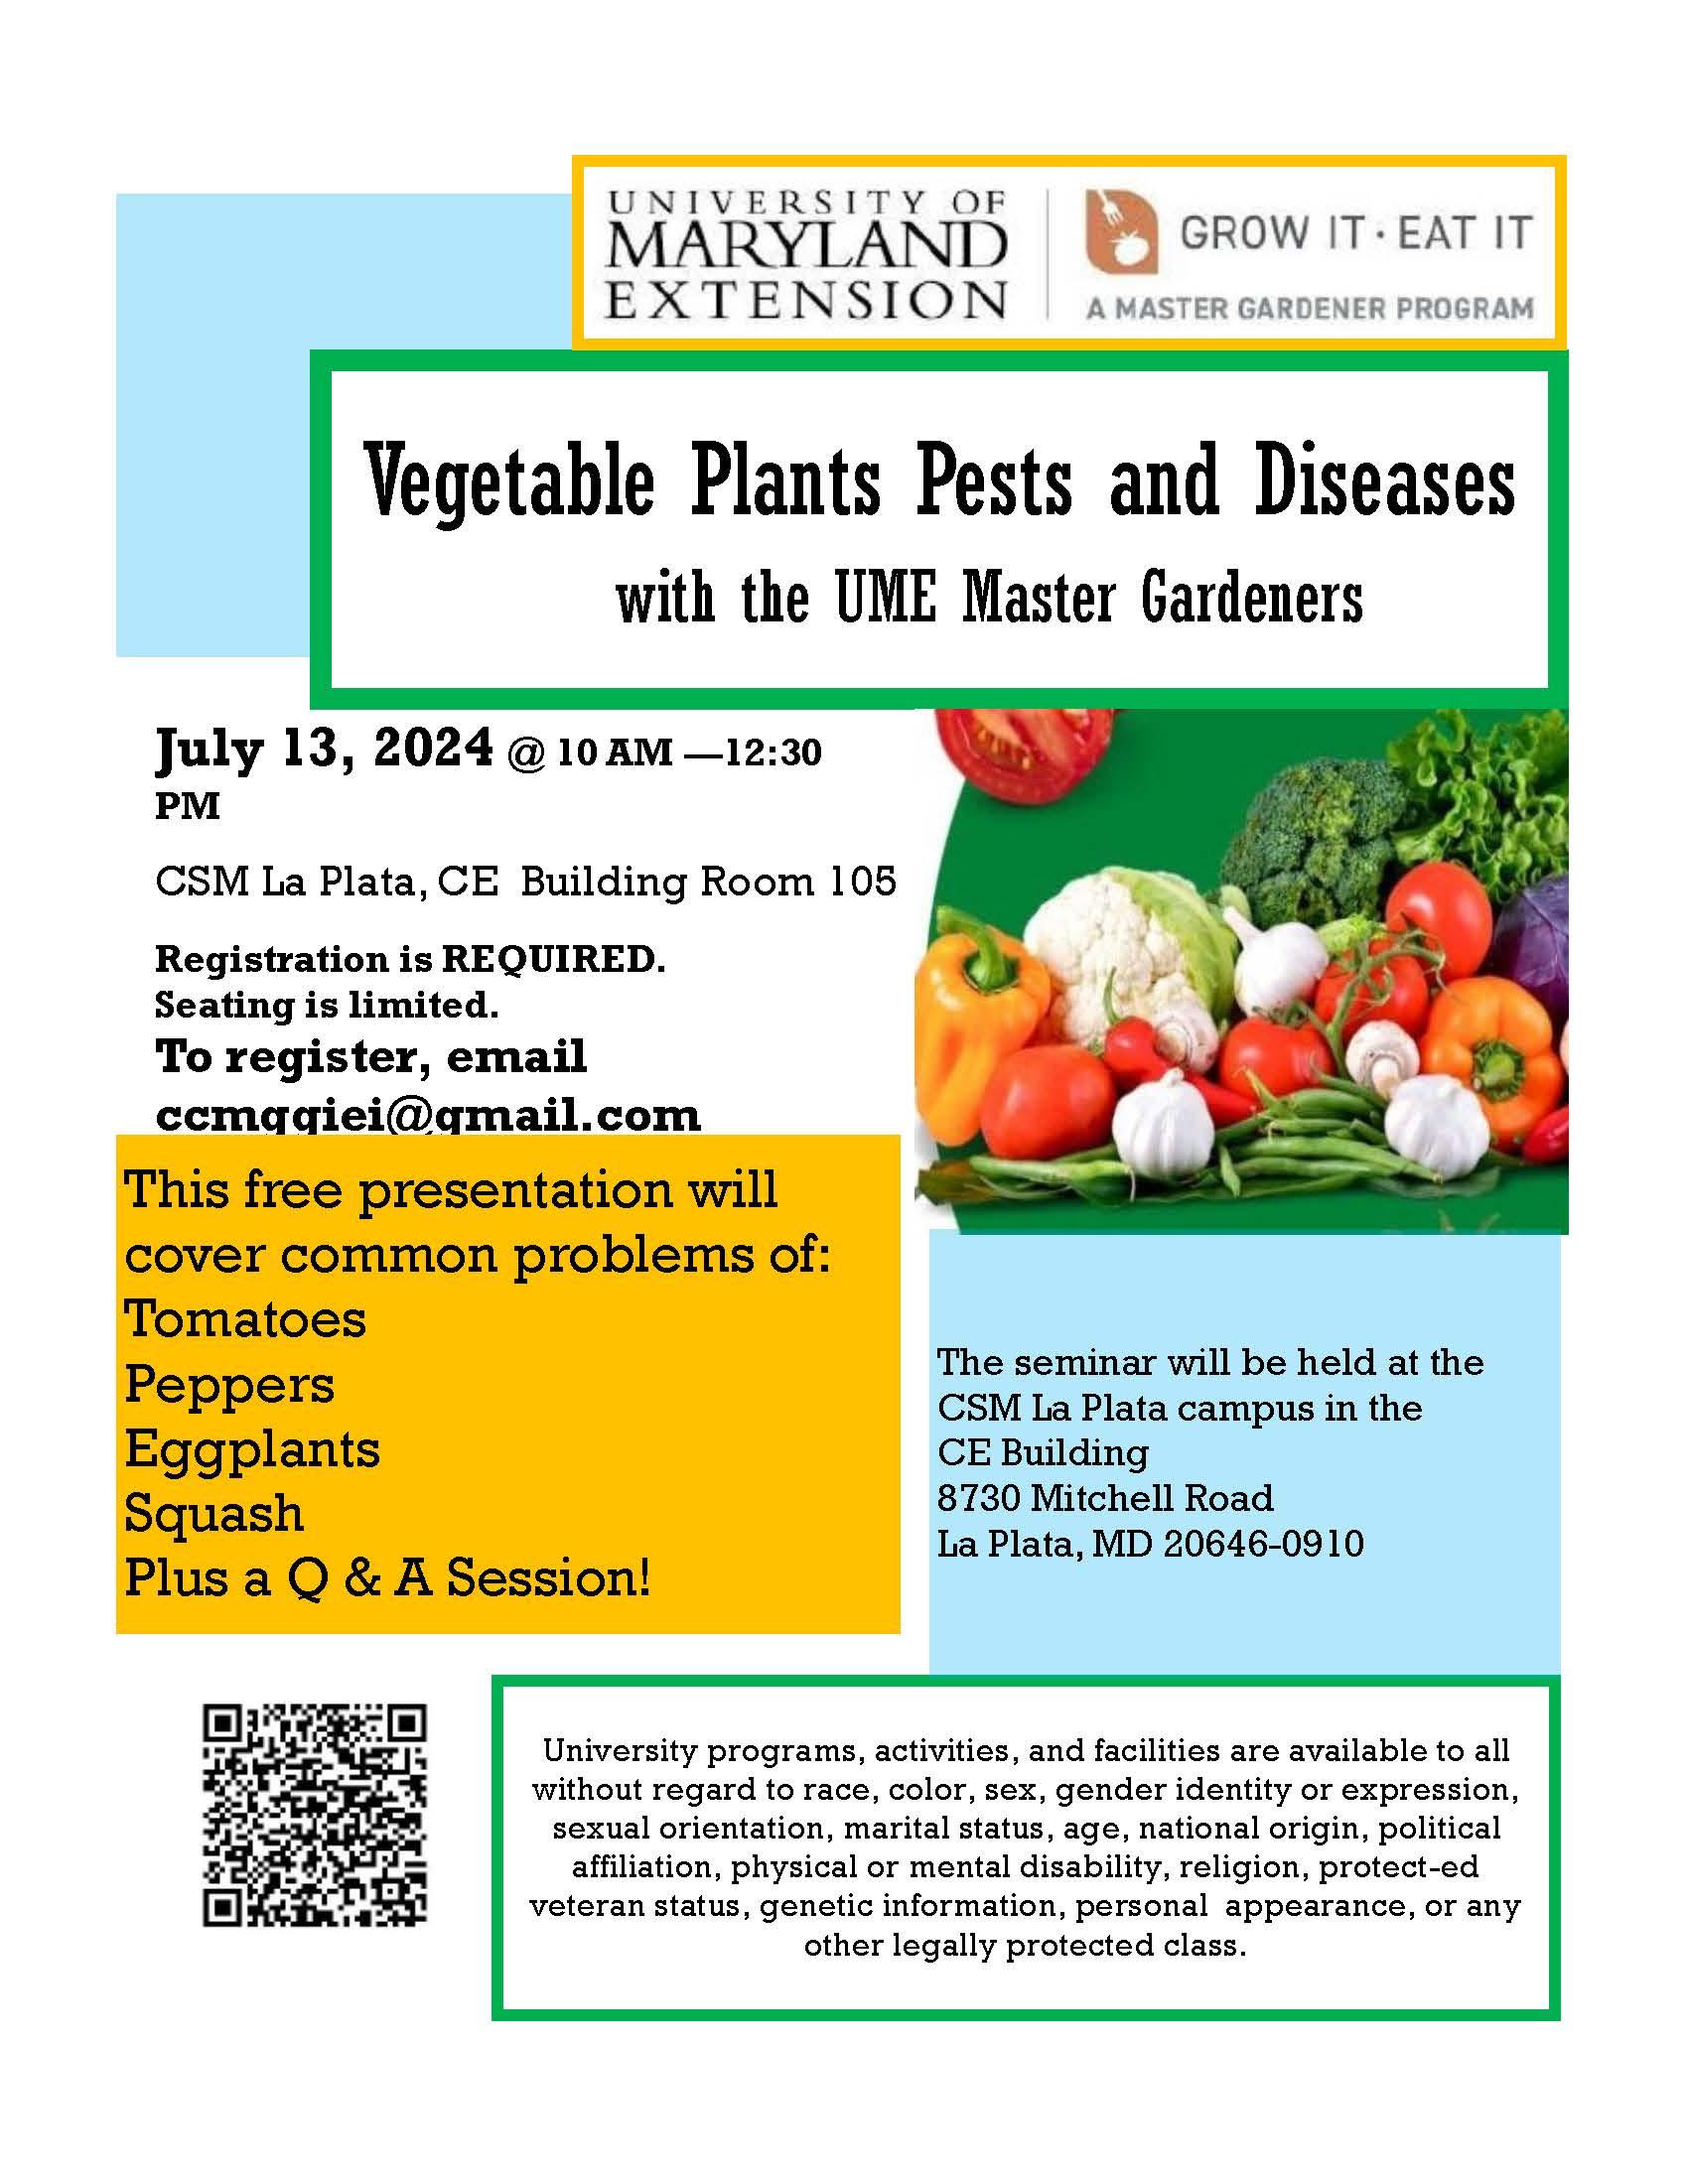 Charles County Master Gardeners Grow It Eat It Workshop on July 13, 2024